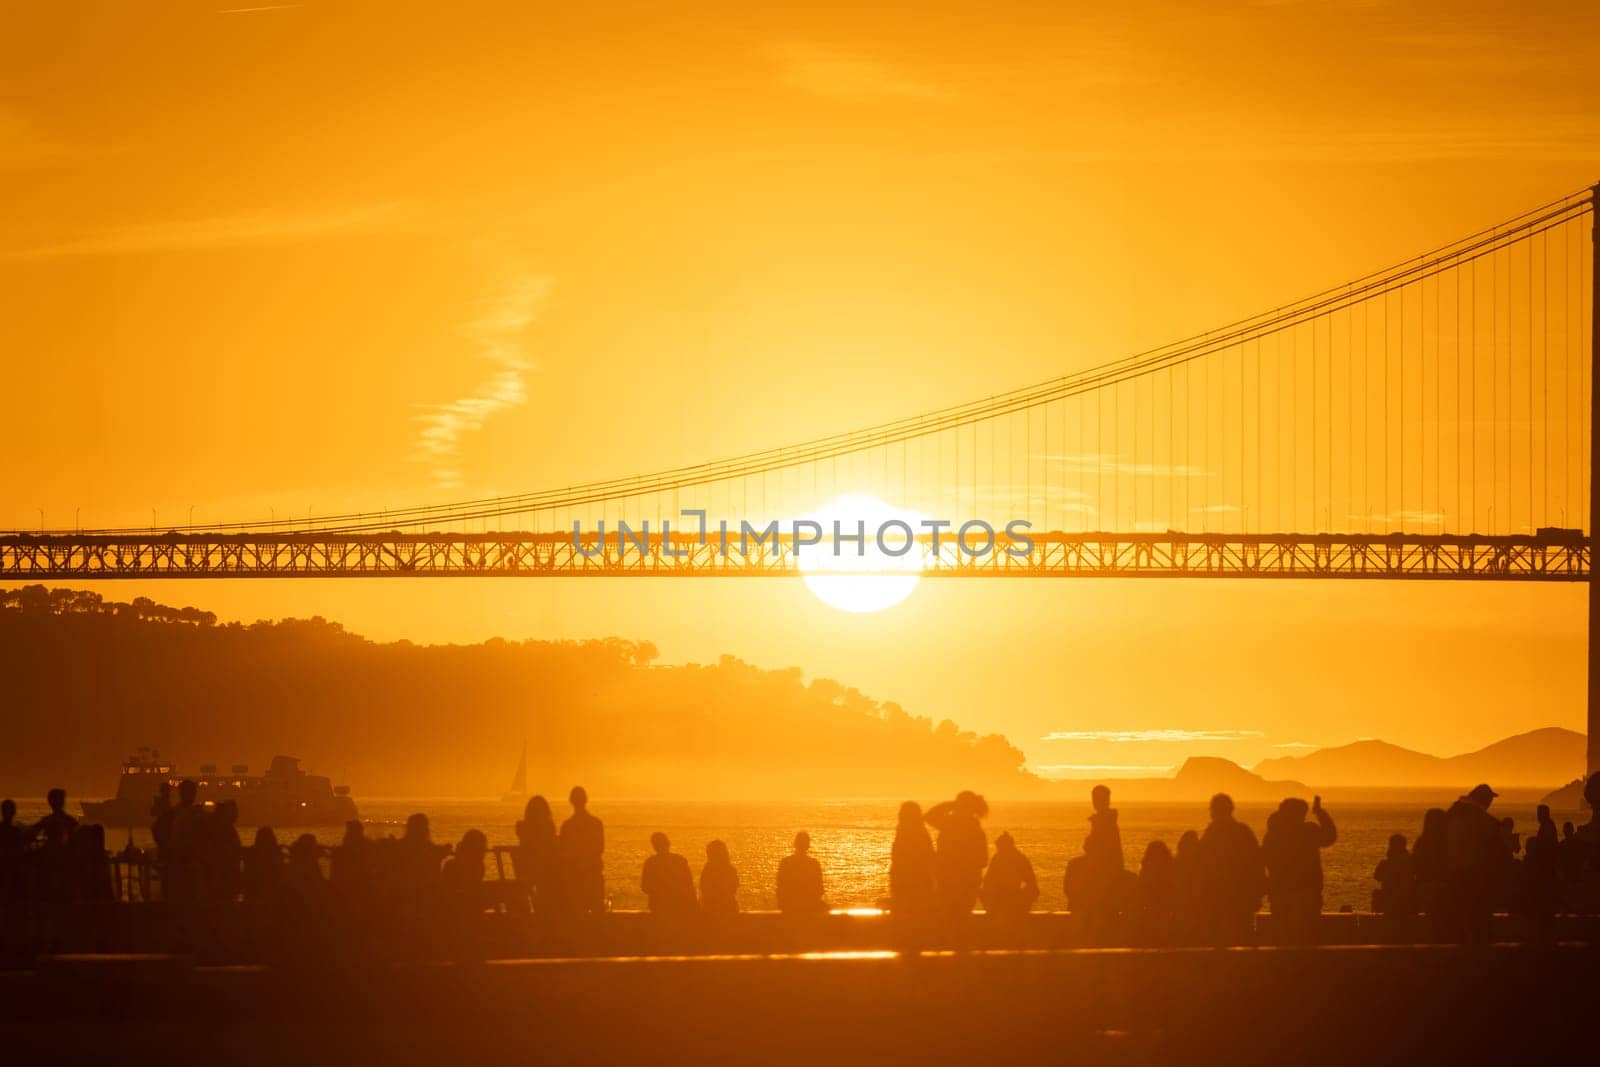 Sunset Silhouette: A Group of People Admiring the Majestic Ocean Bridge by Studia72